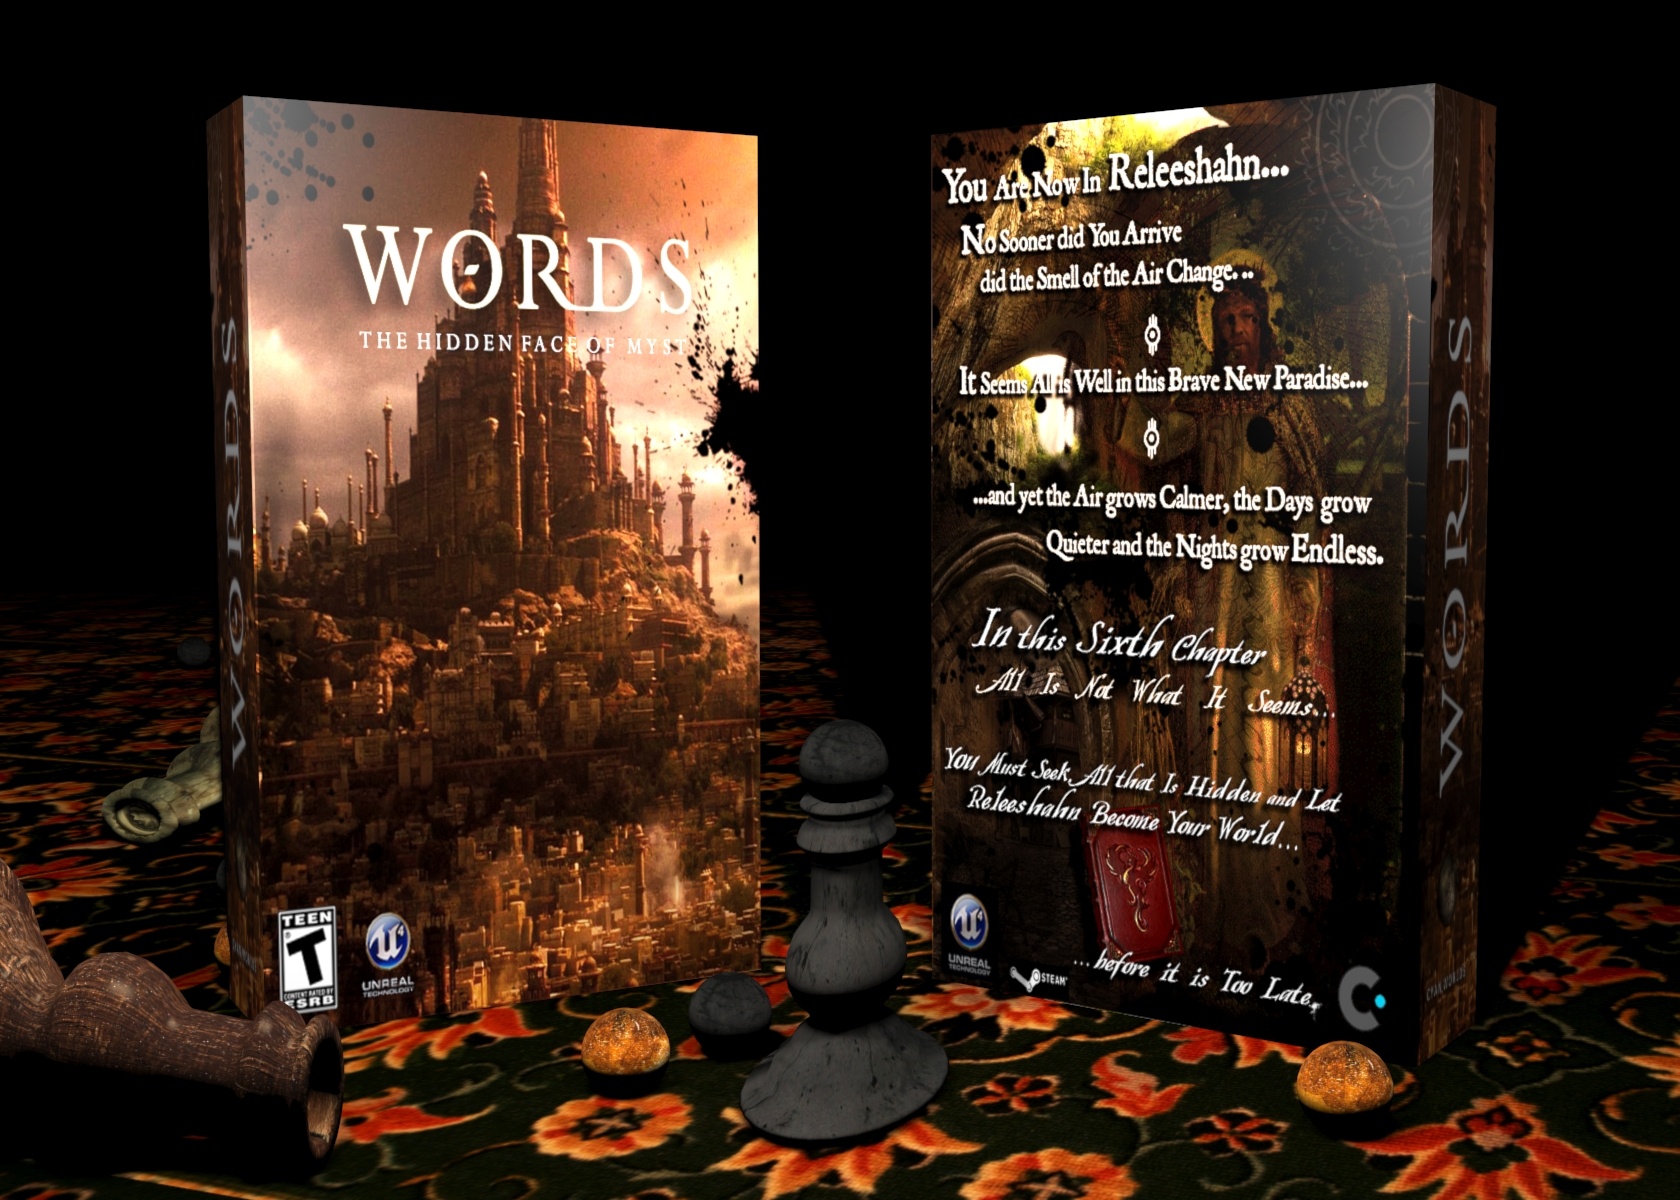 Words:  The Hidden Face of Myst box cover